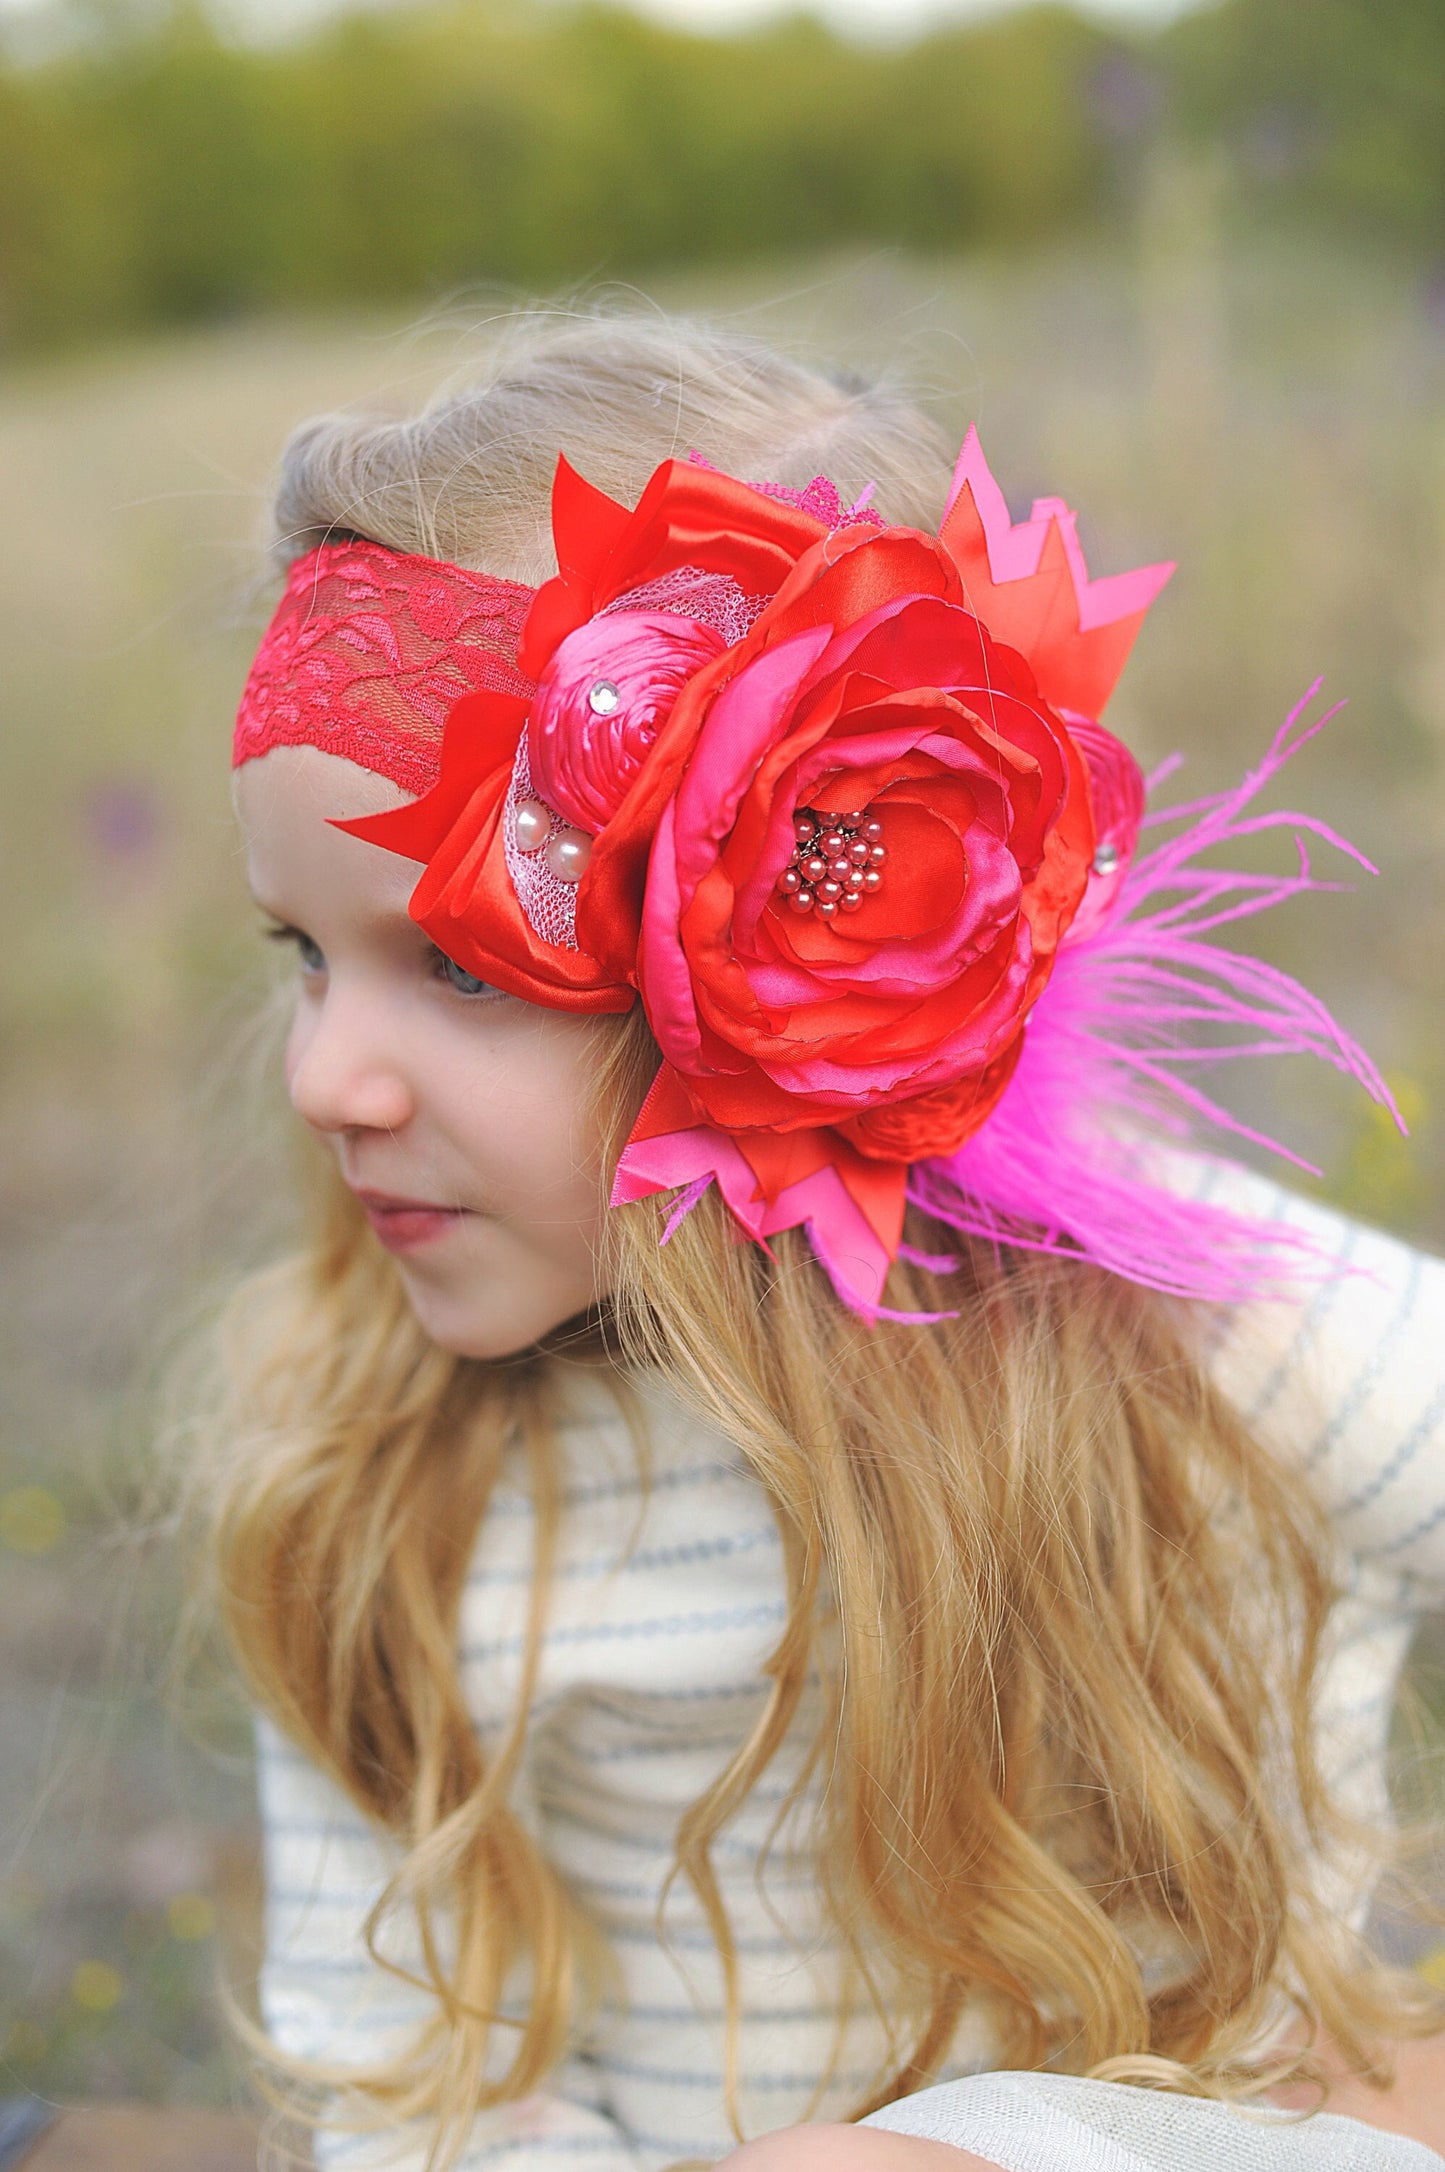 Red and Hot Pink Large Flower Headband- Flower Headband, Flower Crown, Red Flower Headpiece, Flower Headband, Boho Flower Crown, girls gift